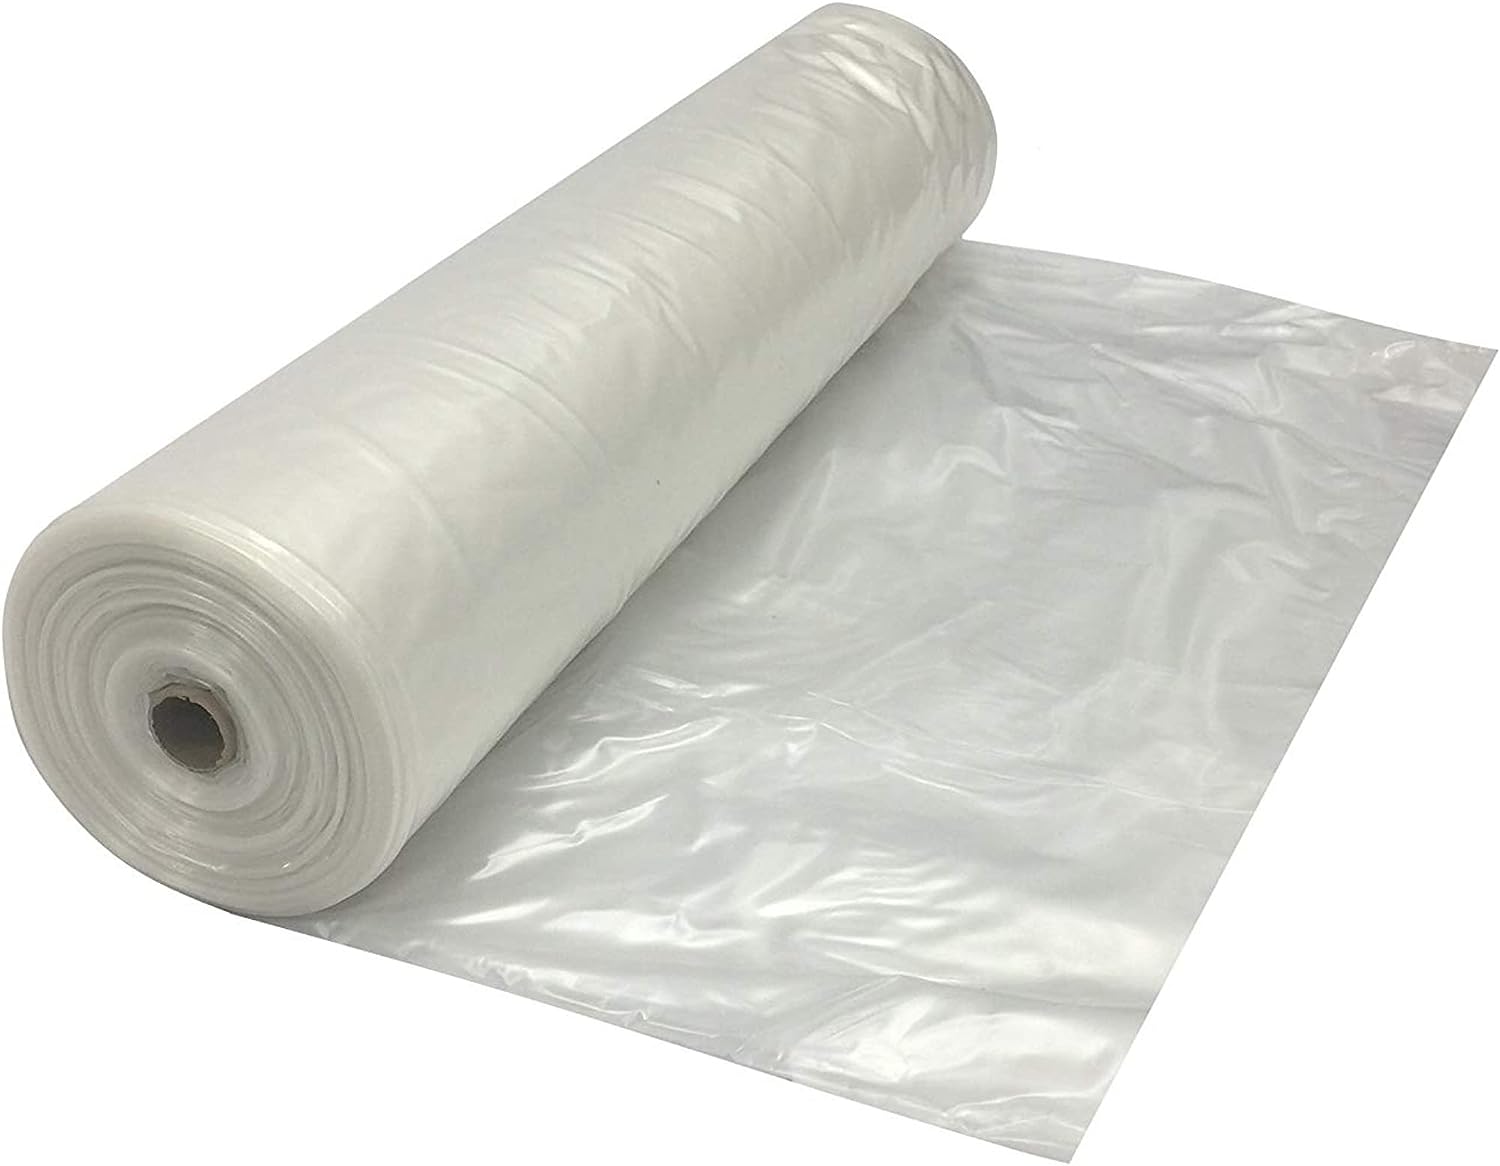 Poly Sheeting, 6 mil, 20' x 100' Clear